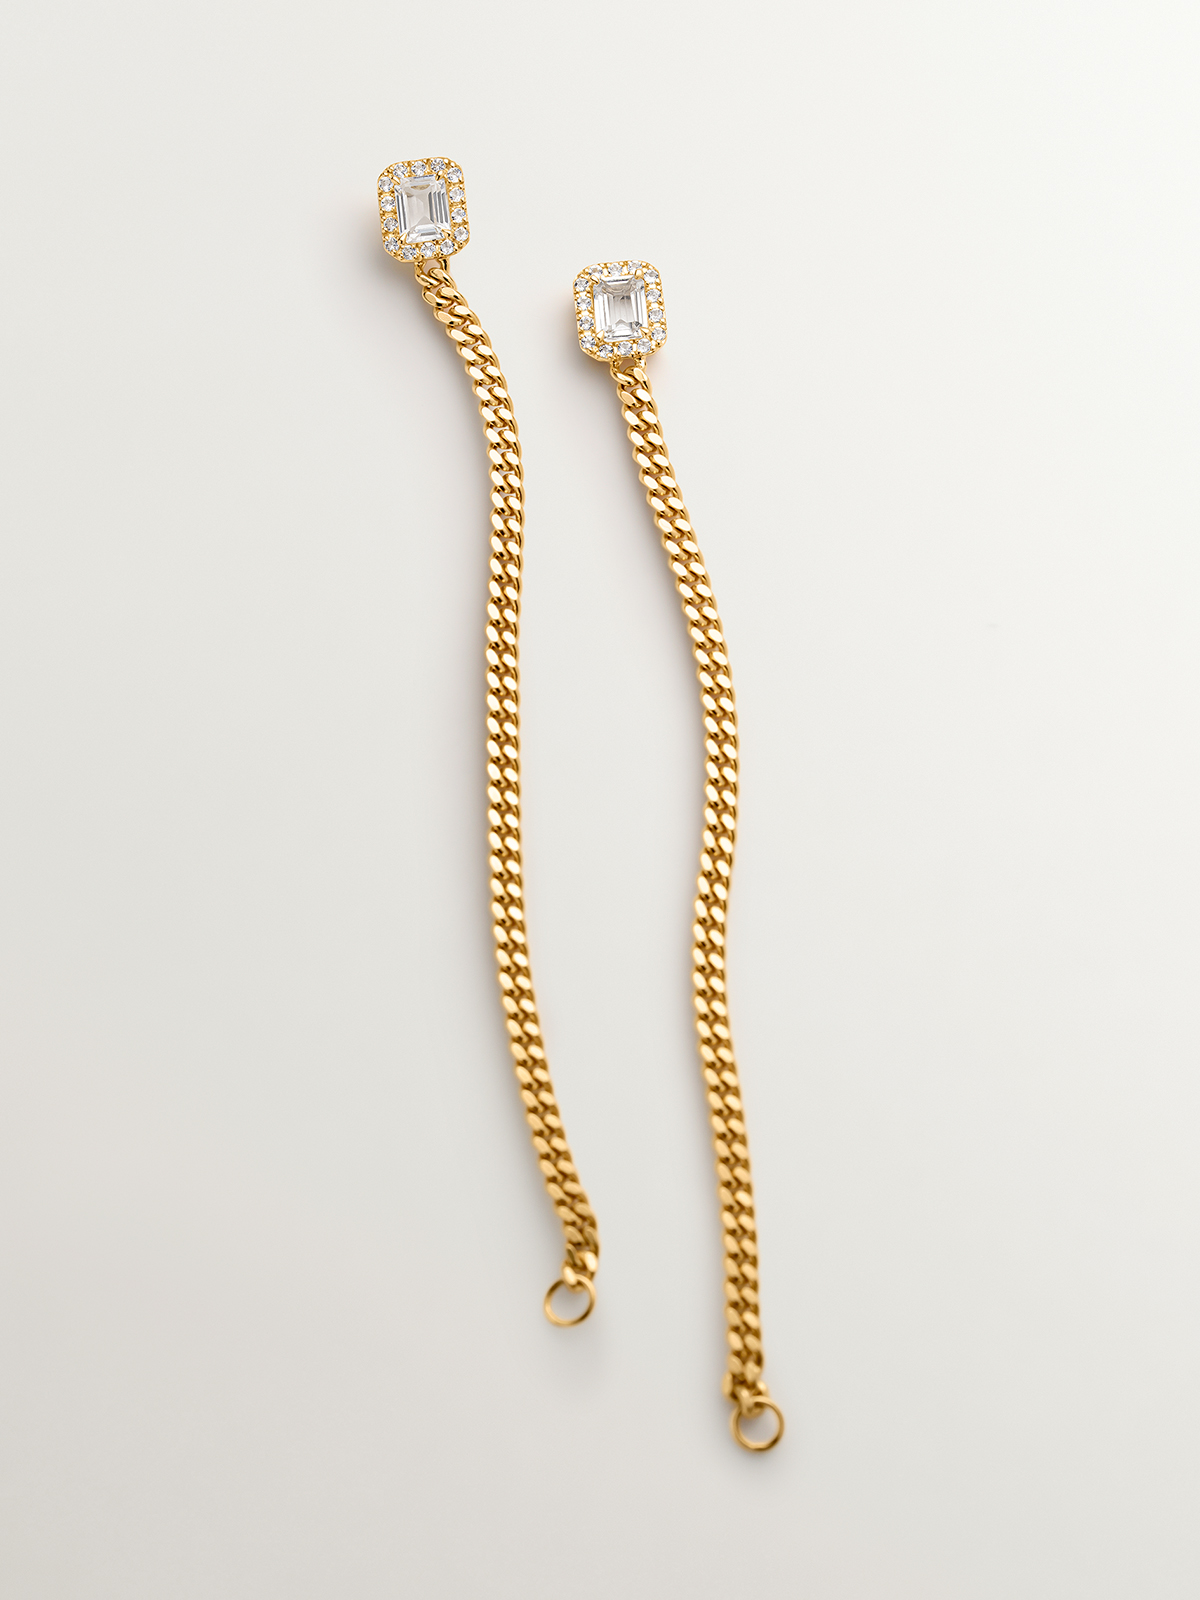 925 Silver barbed chain earrings coated in 18K yellow gold with topazes.